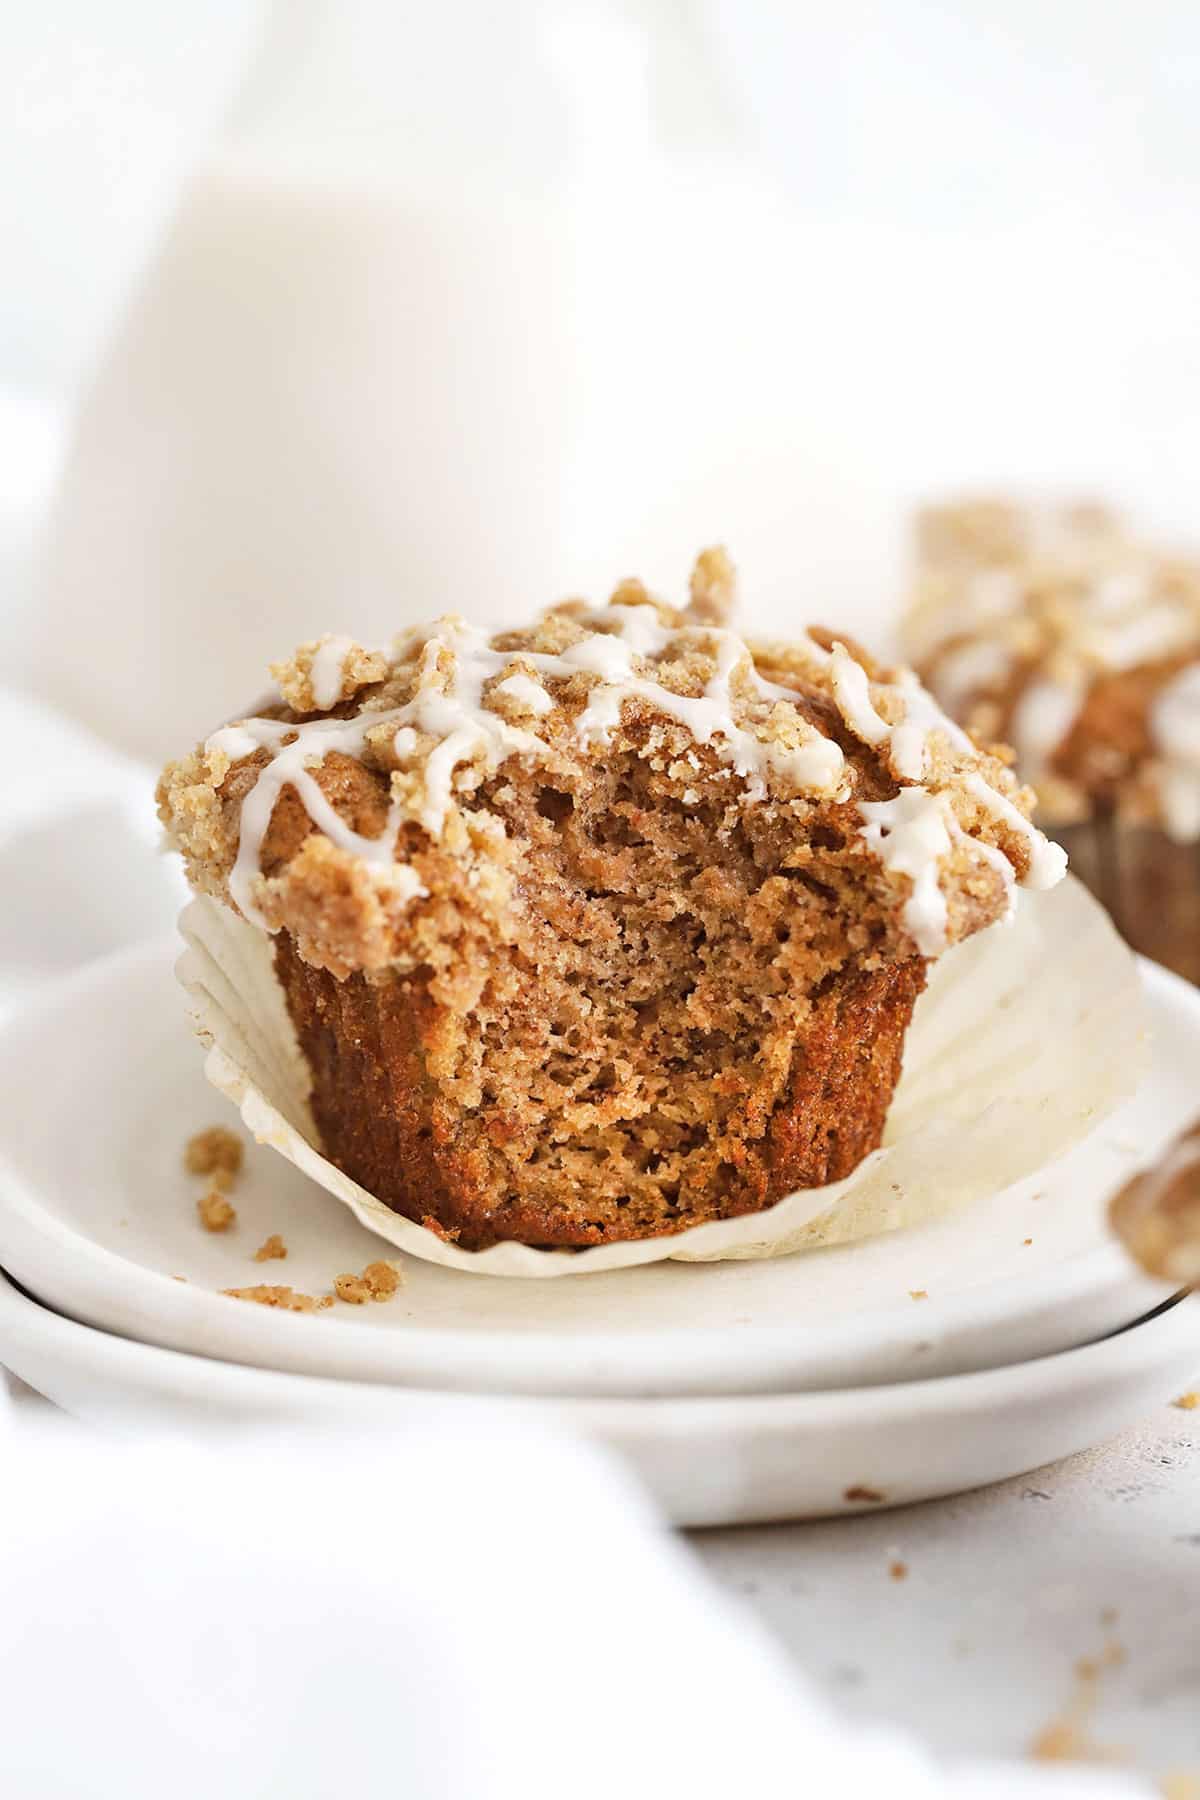 Gluten-Free Cinnamon Banana Crumb Muffins are your new brunch favorite. Fluffy gluten-free cinnamon banana muffins topped with cinnamon streusel topping. It's a double-dose of cinnamon goodness! // gluten-free banana streusel muffins / gluten-free banana muffins with streusel topping / gluten-free banana muffins with crumb topping / gluten-free cinnamon banana muffins recipe / gluten-free banana coffee cake muffins / gluten-free banana muffins recipe / gluten-free muffins